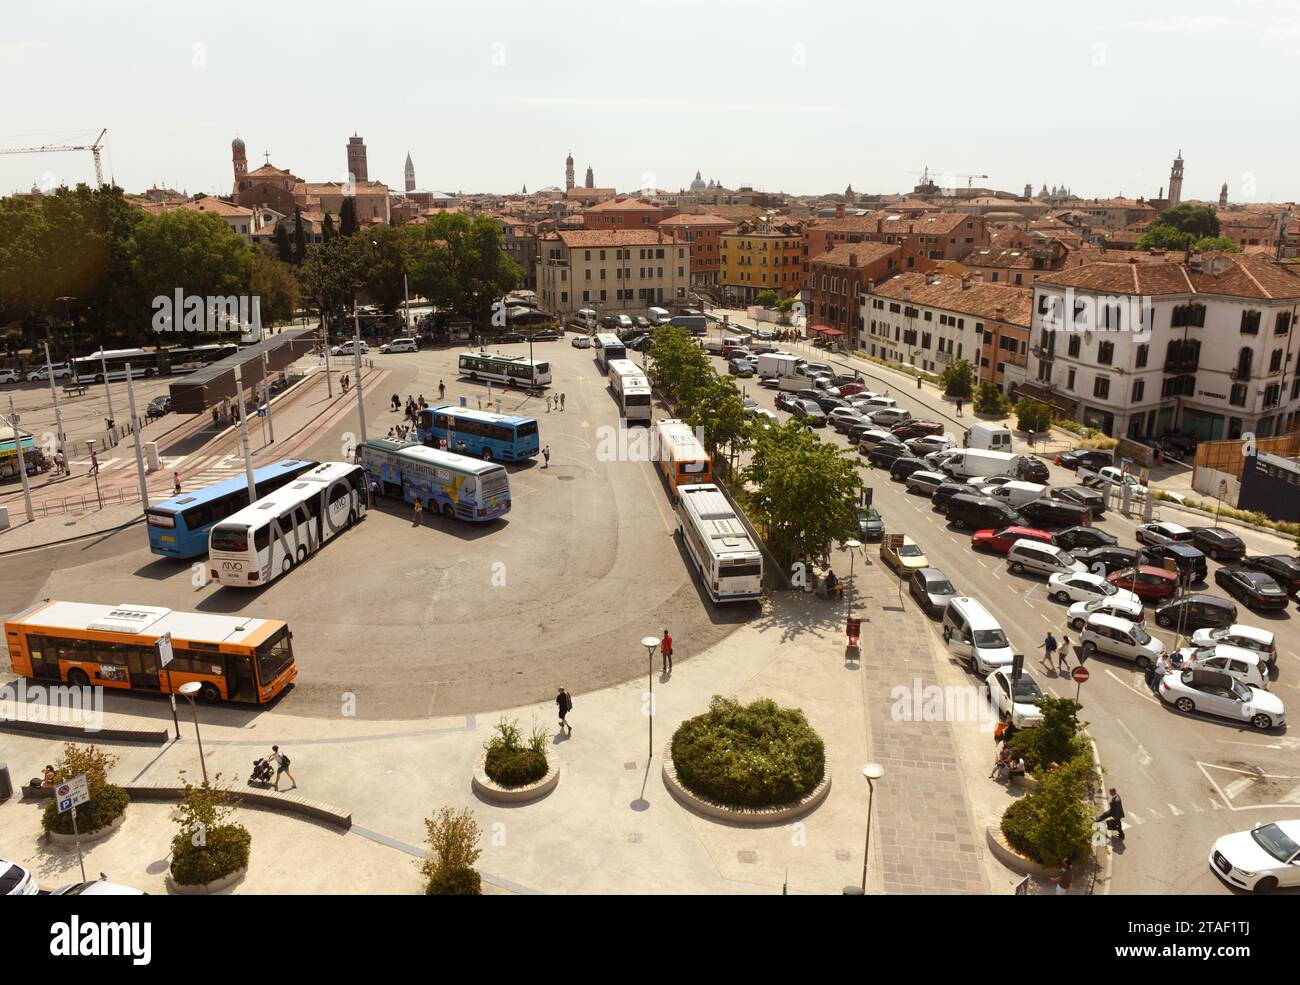 Venice, Italy - June 07, 2017: Transport at the Piazzale Roma square in Venice. Stock Photo